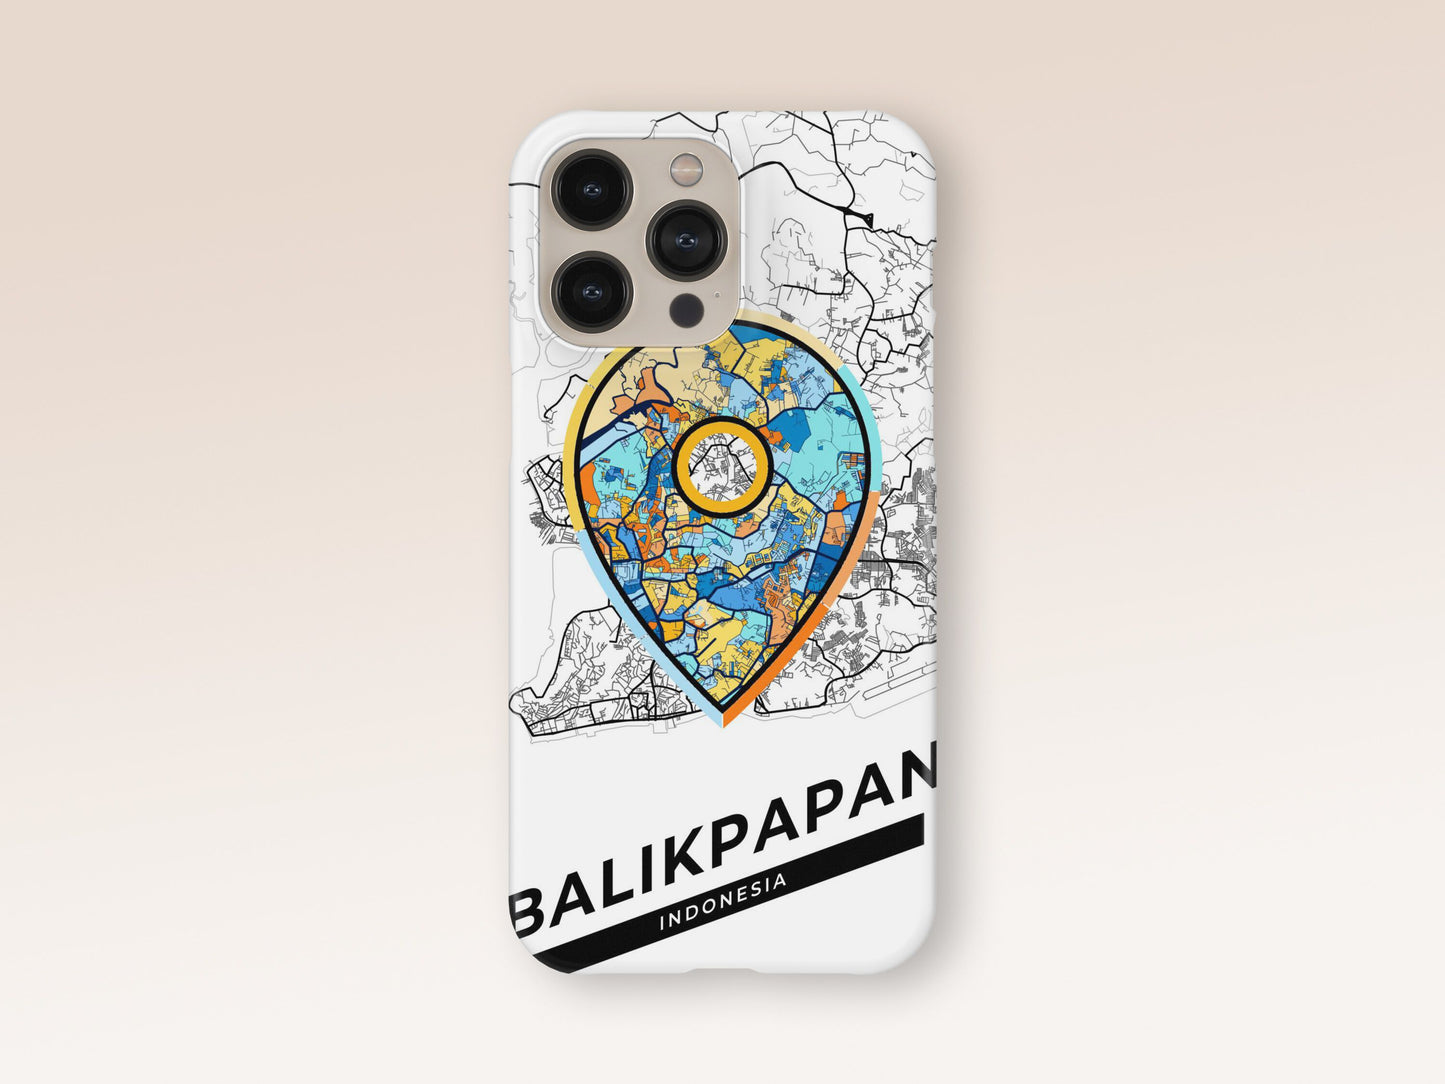 Balikpapan Indonesia slim phone case with colorful icon. Birthday, wedding or housewarming gift. Couple match cases. 1